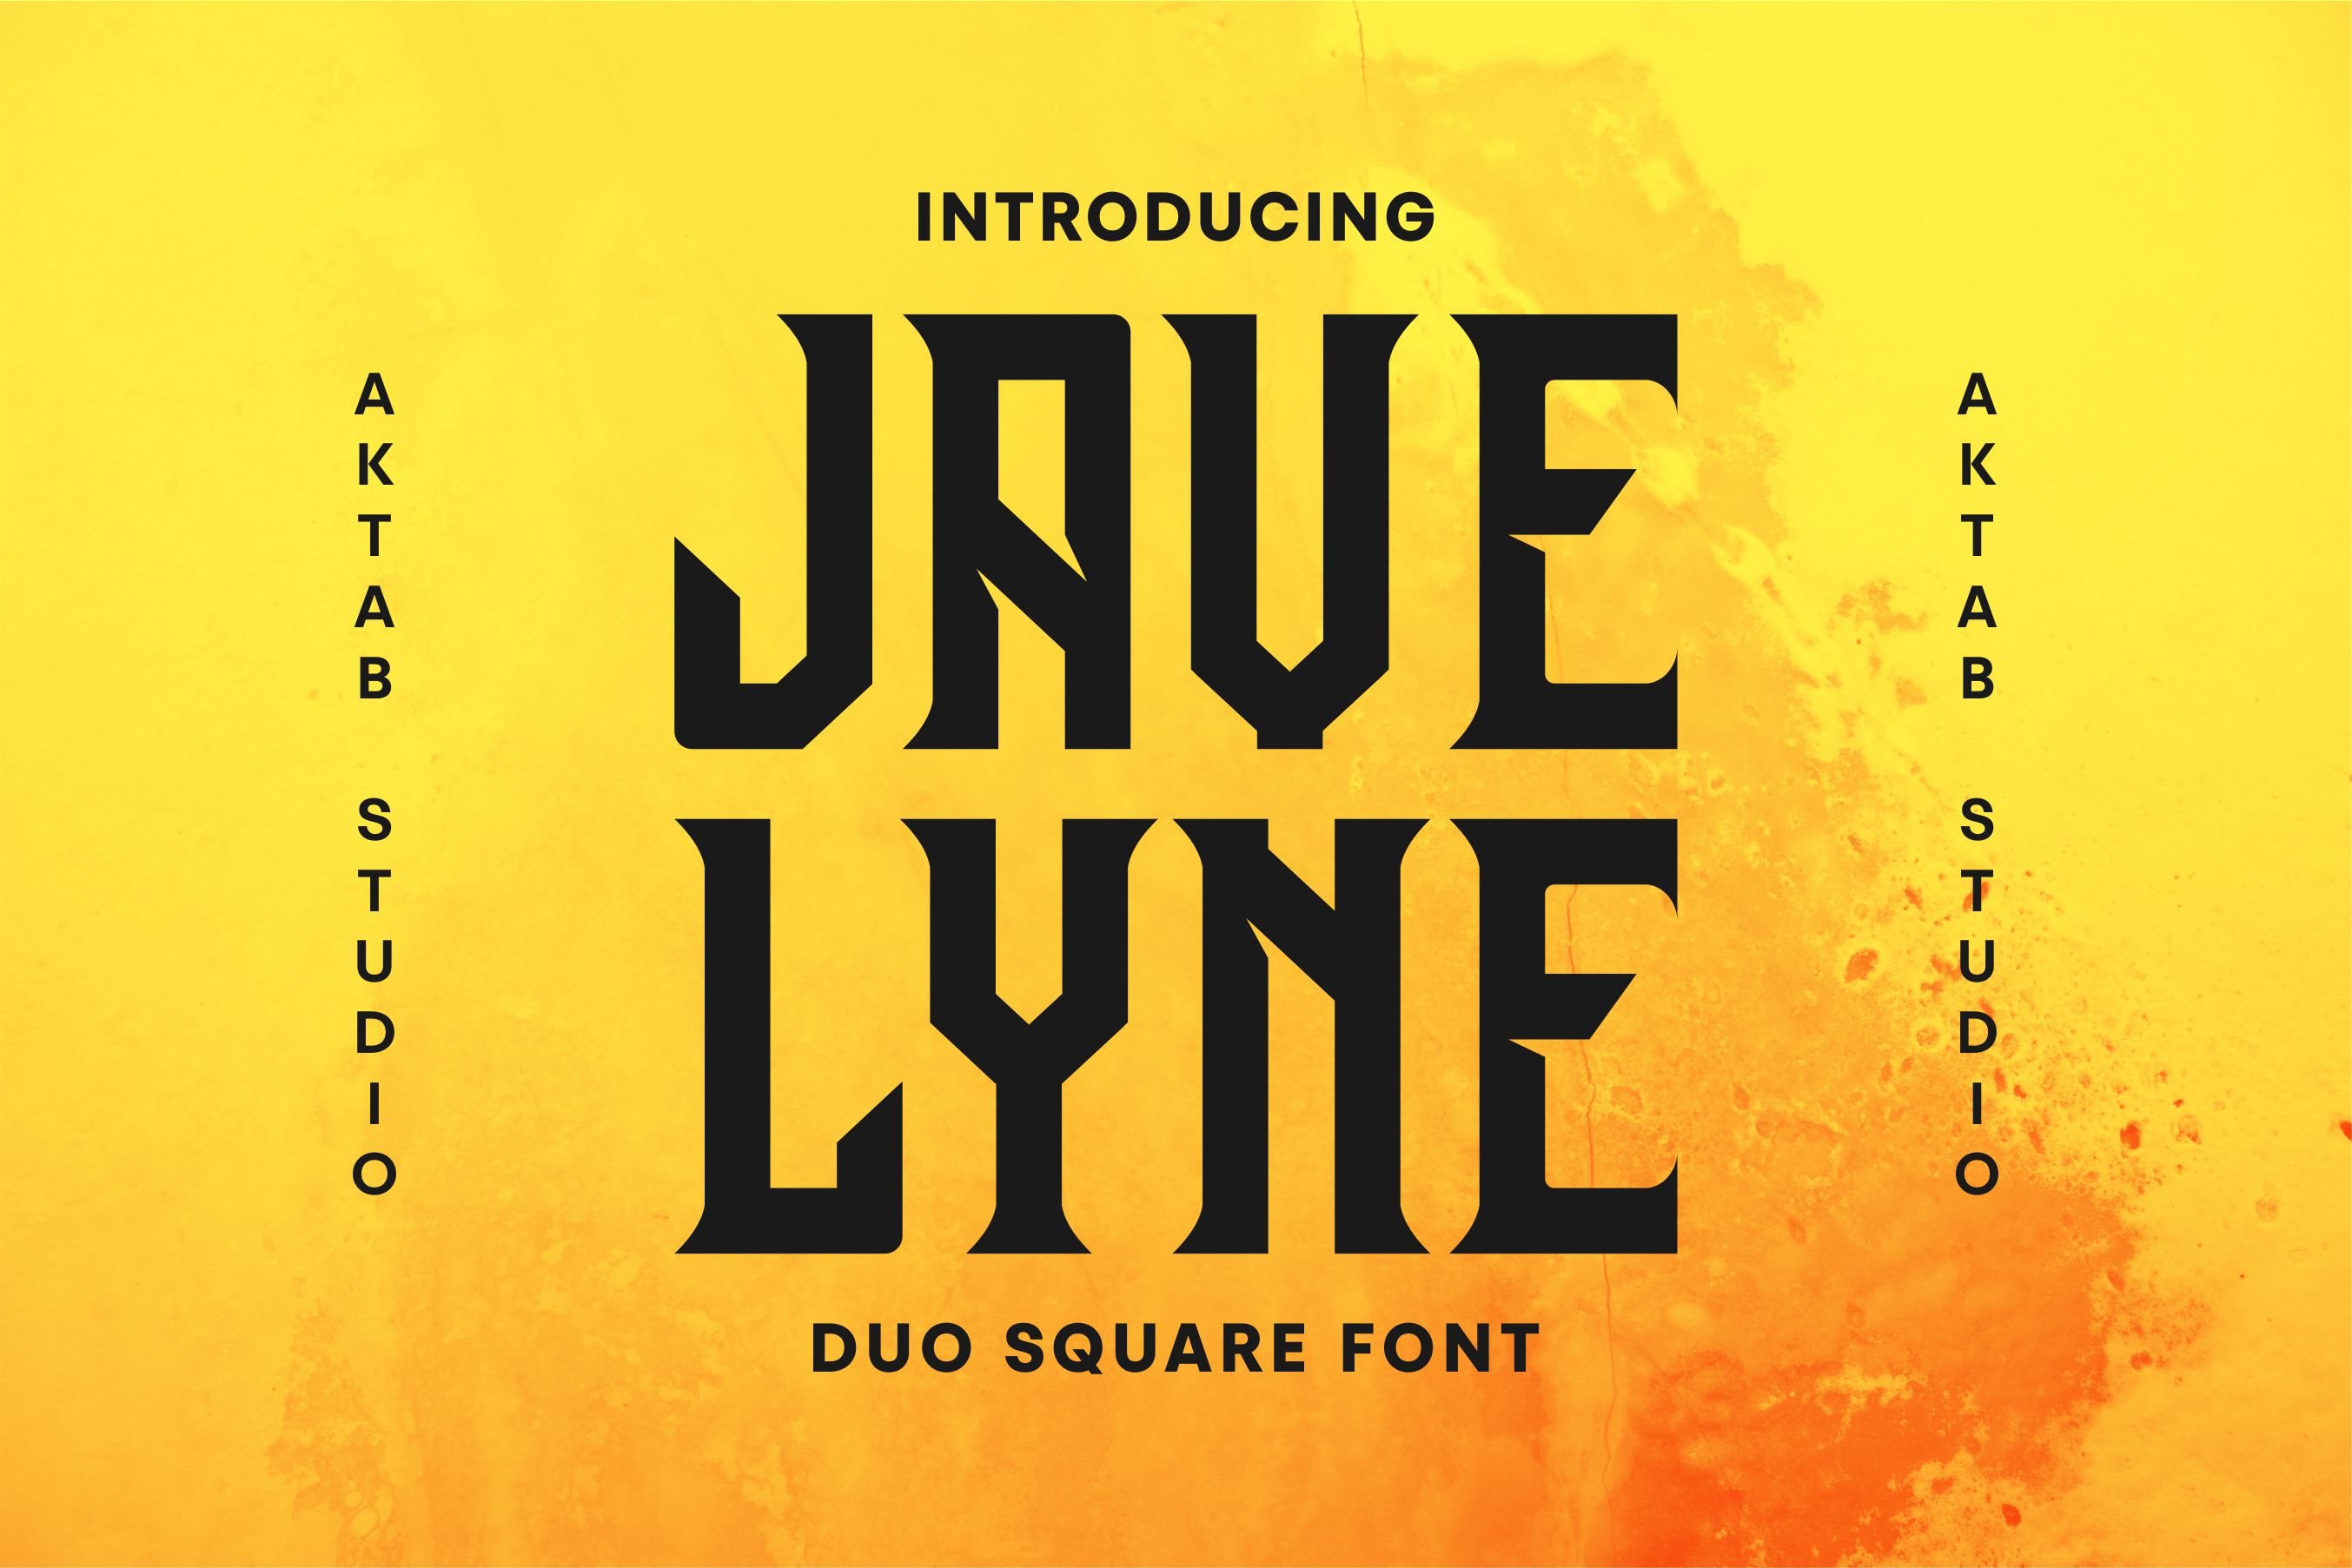 JAVELYNE FONT SQUARE DUO cover image.